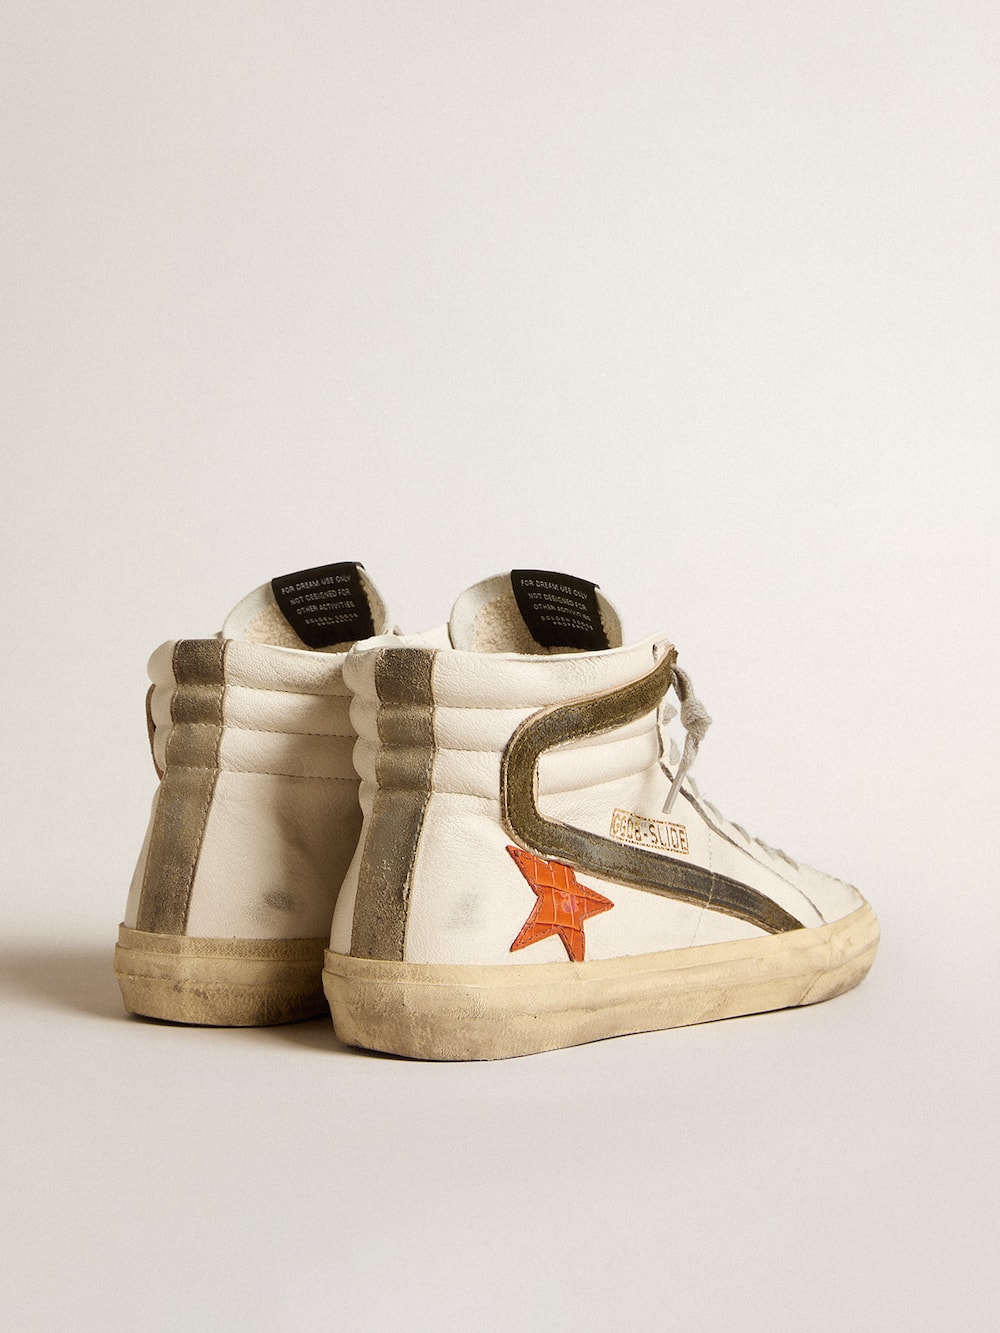 Golden Goose - Nappa leather slides with orange croc-print star and green suede flash in 